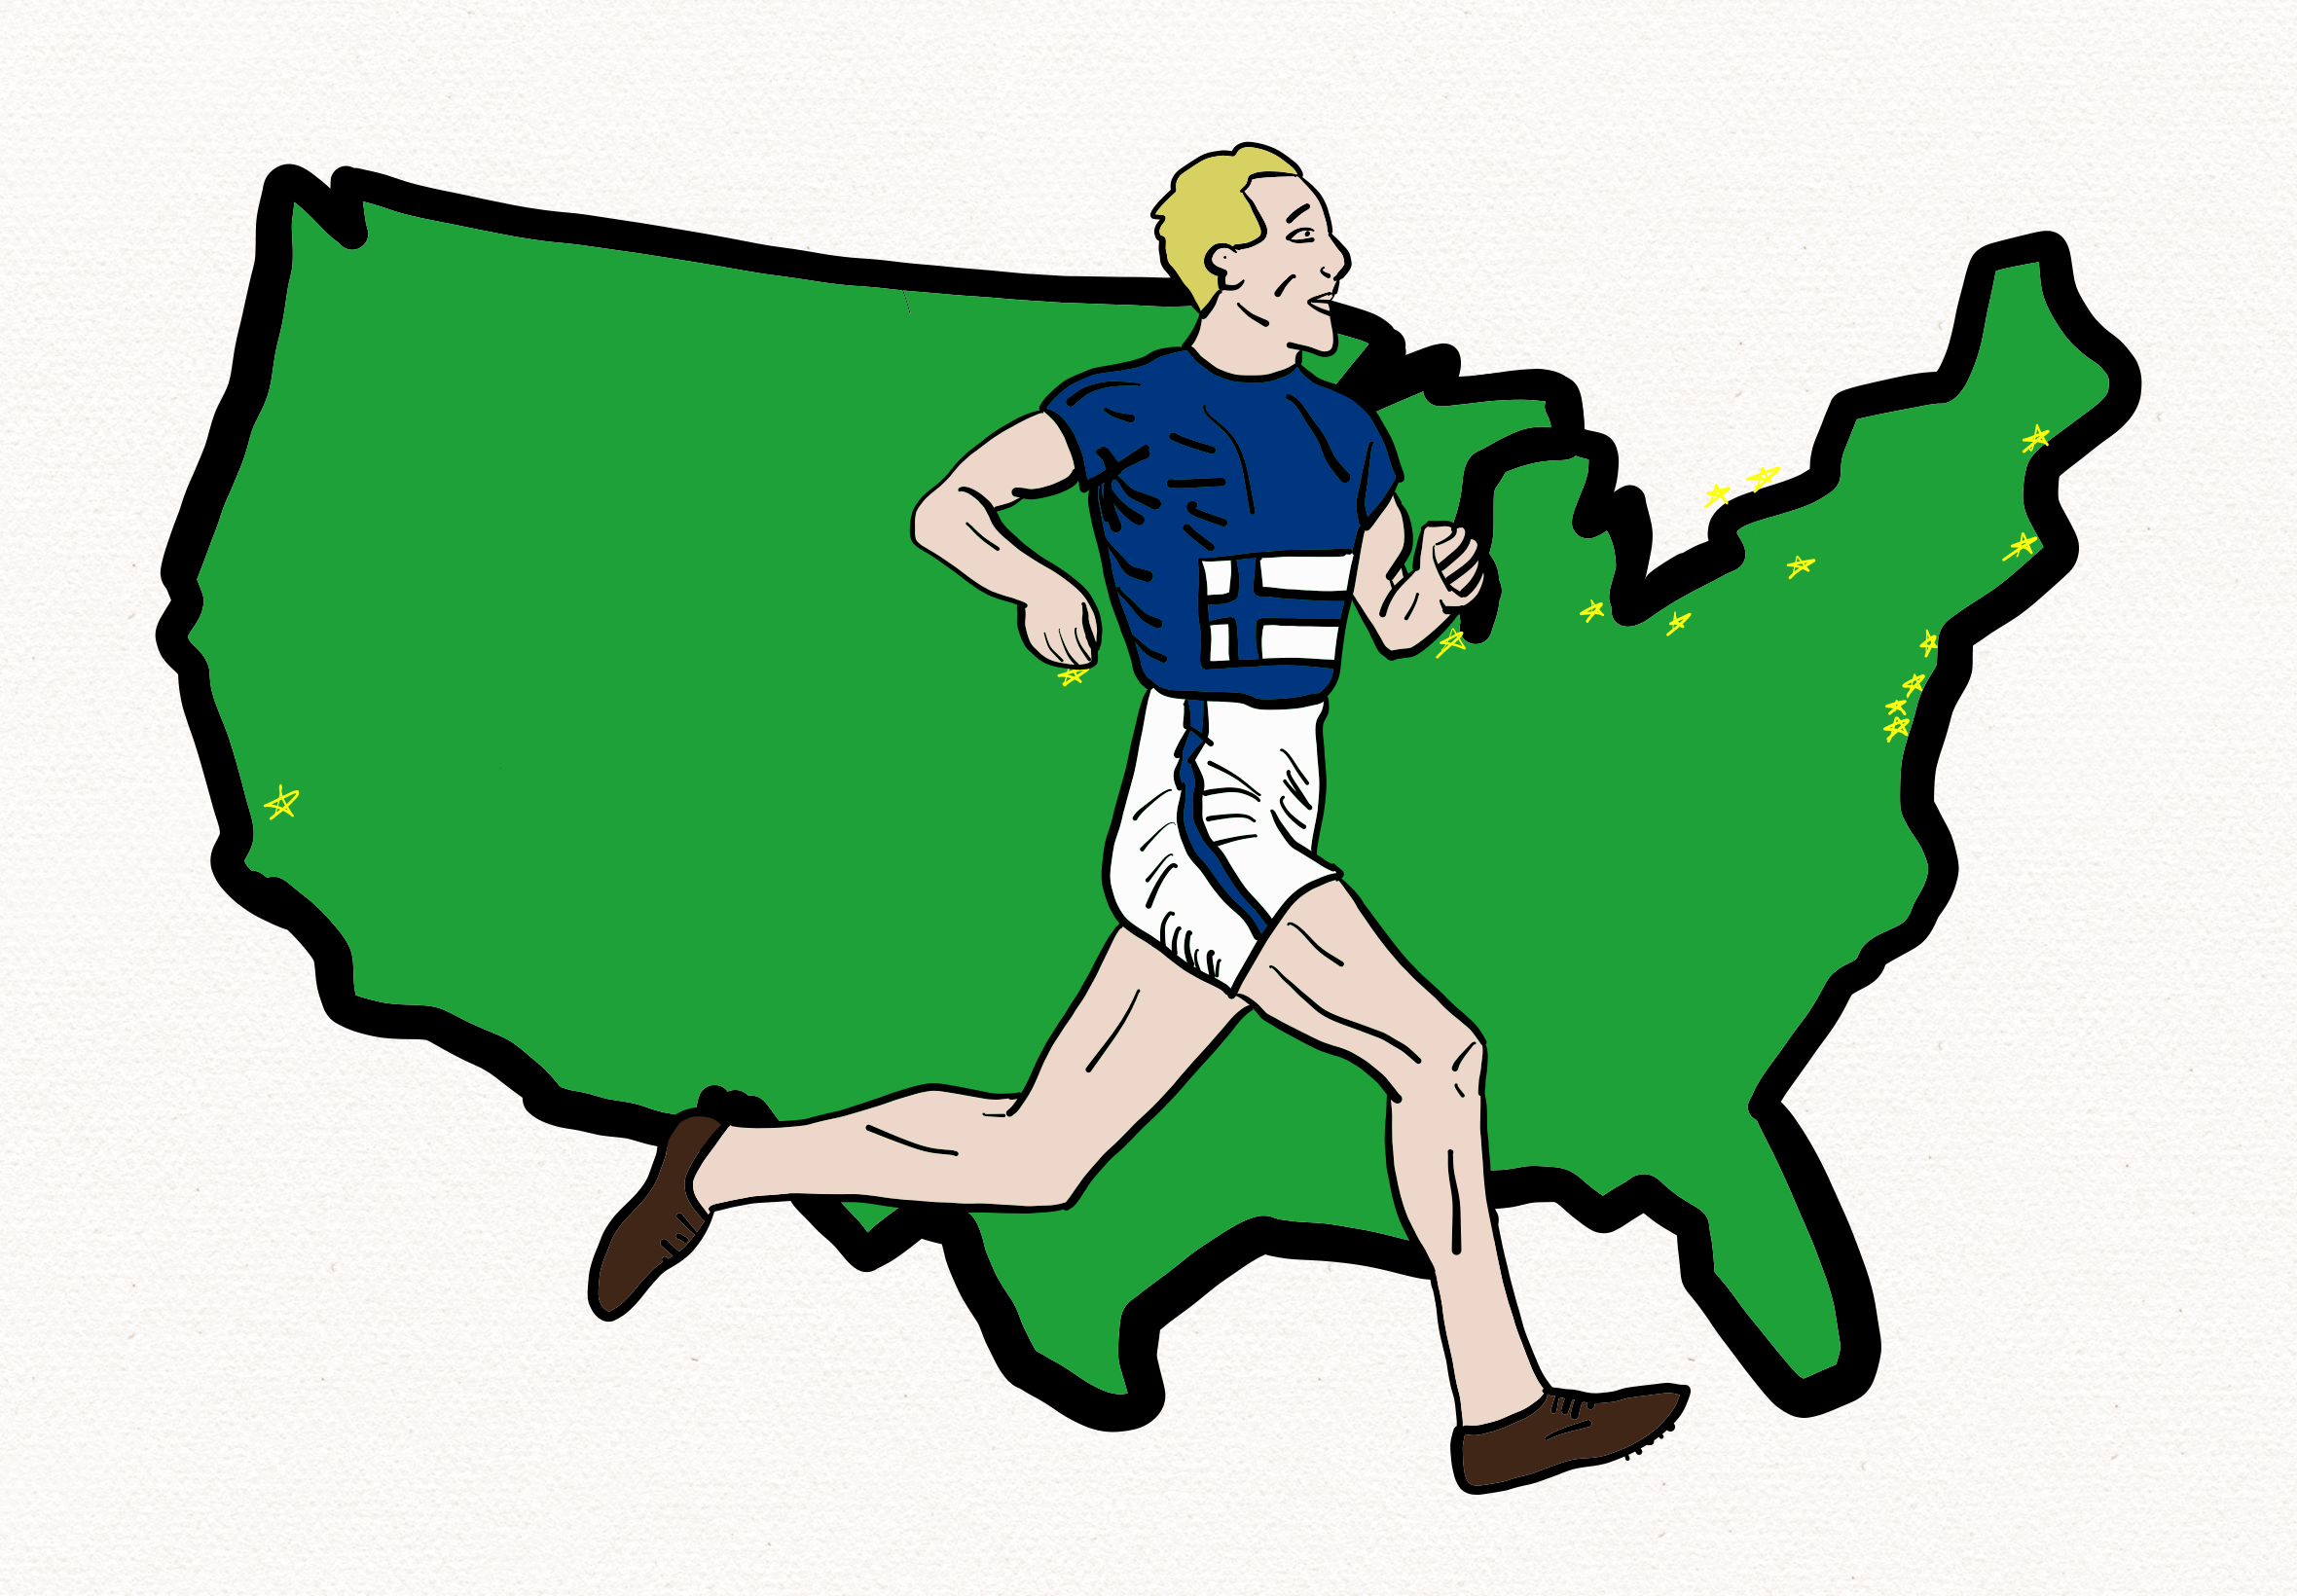 An illustration of Paavo Nurmi in front of a map of the United States, with stars representing some of the locations he raced at in 1925 during his tour of the country.